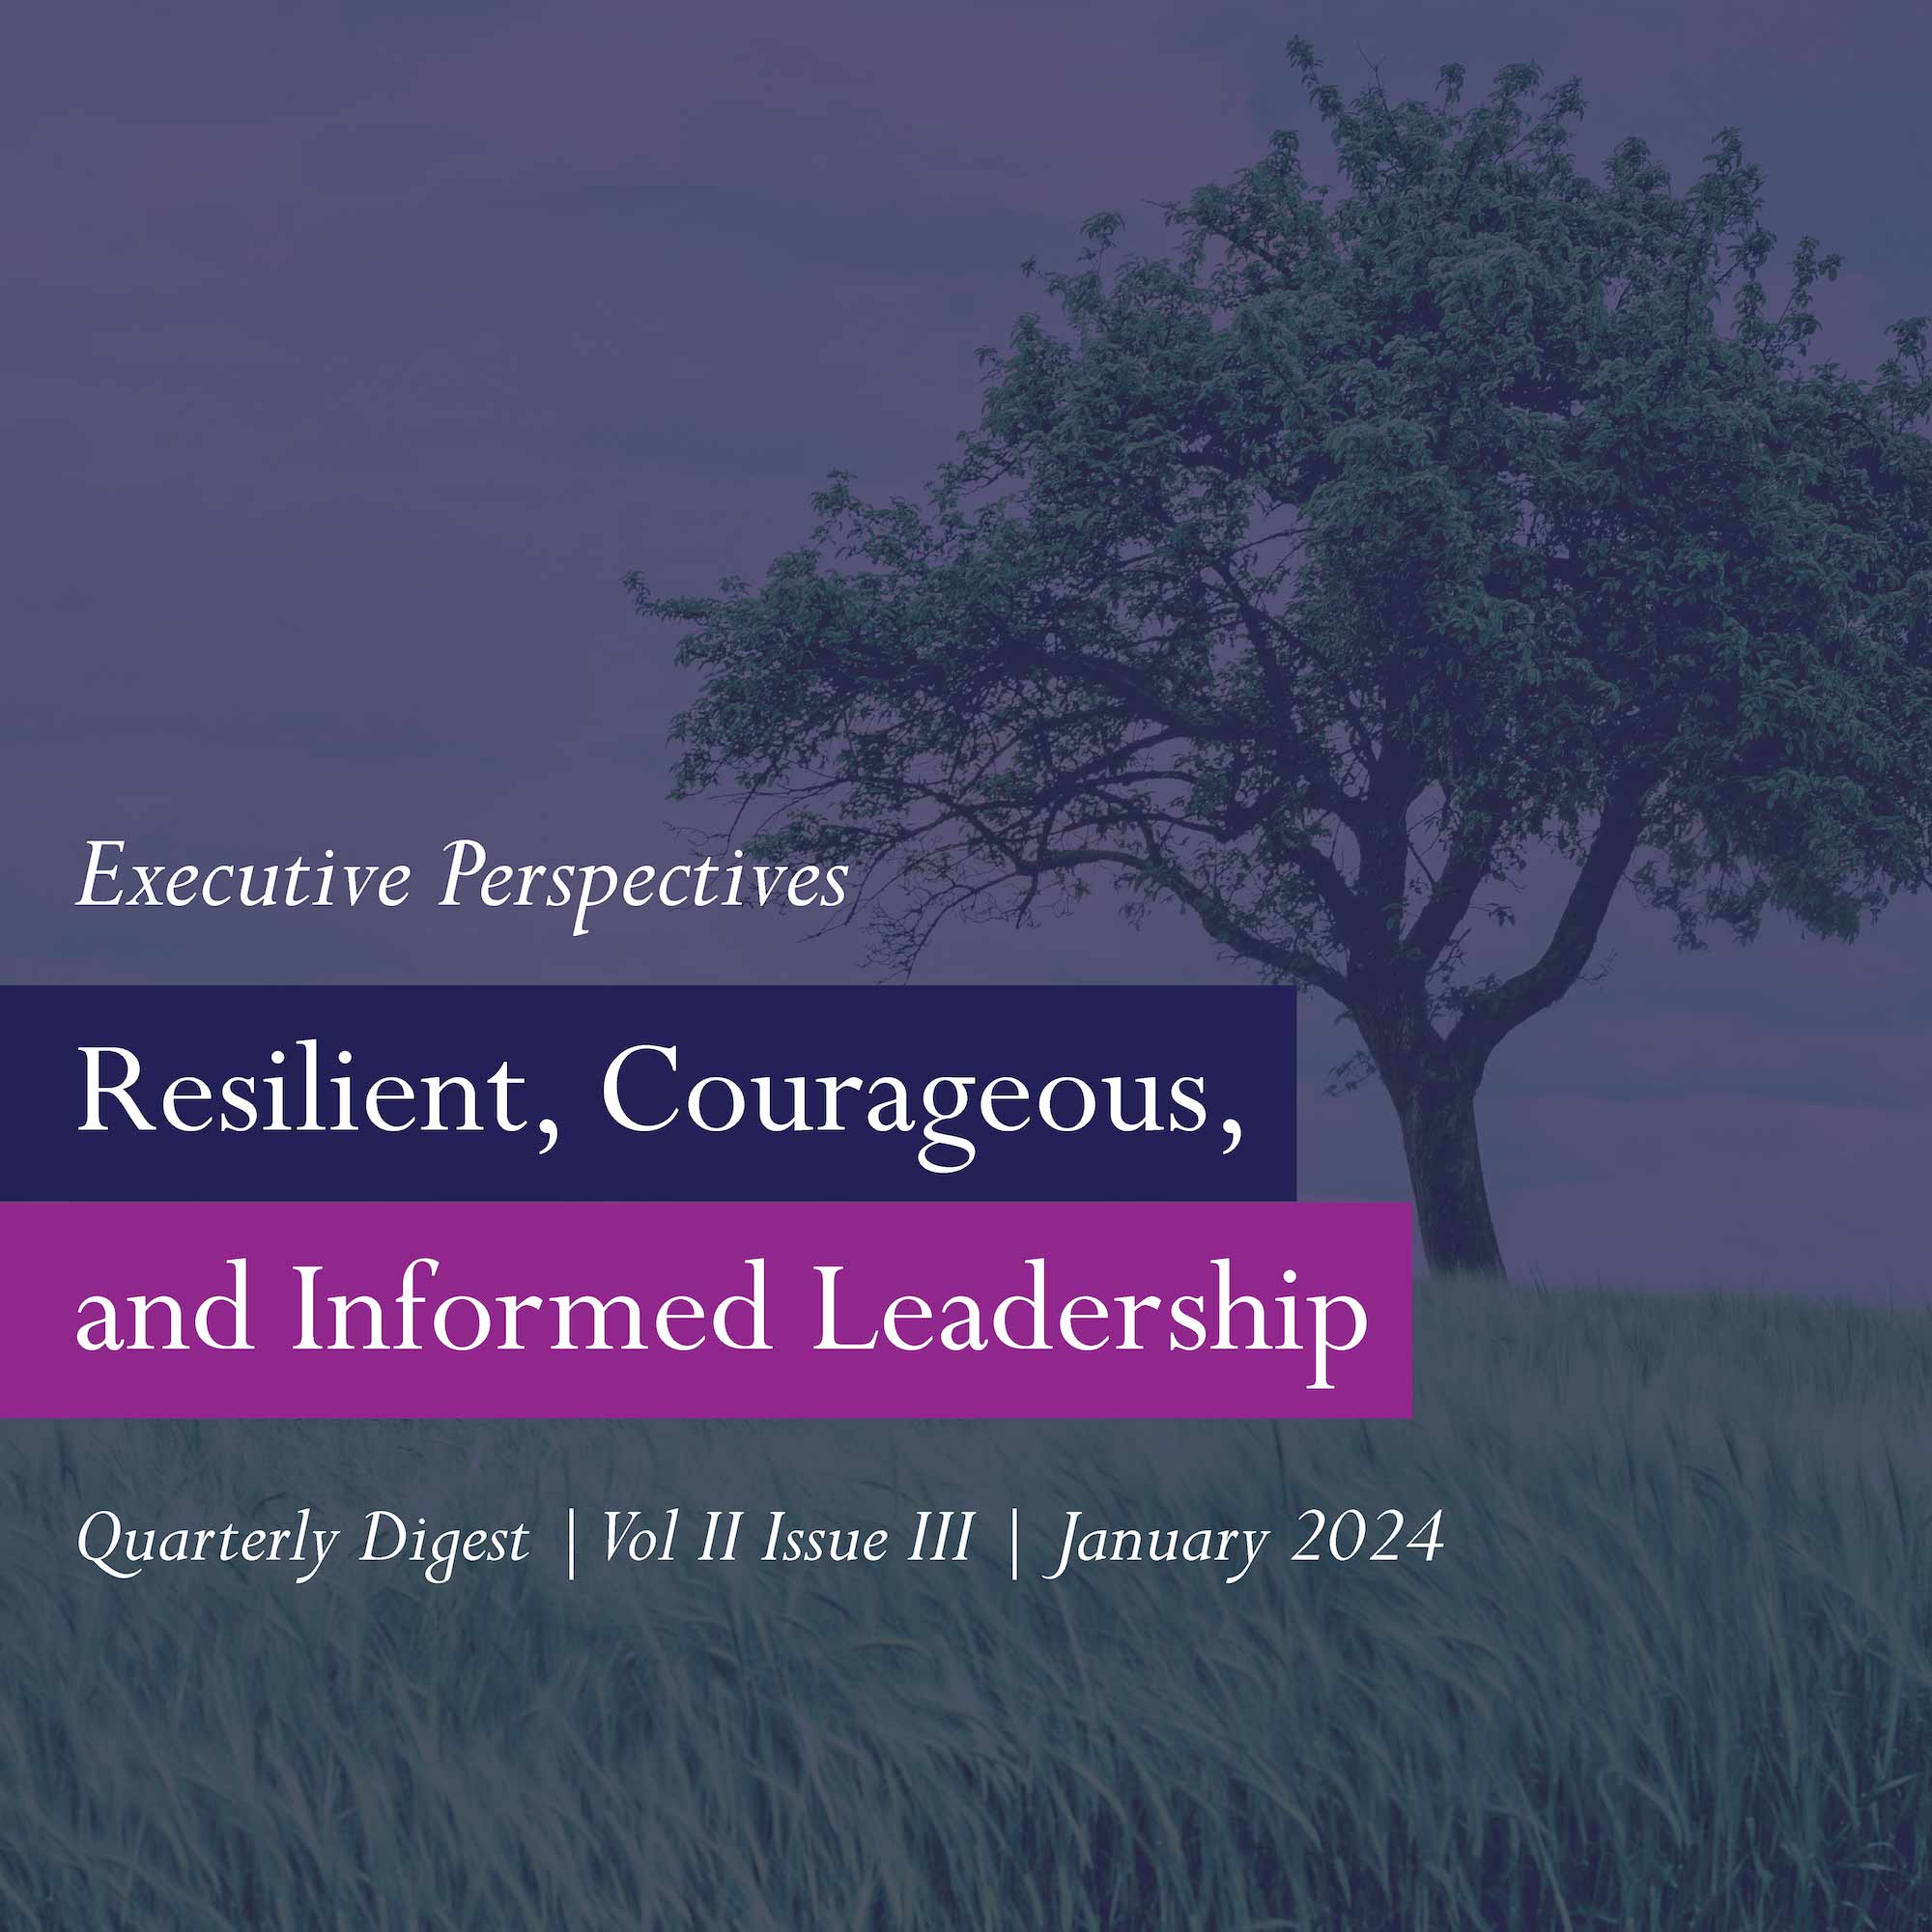  Resilient, Courageous, and Informed Leadership